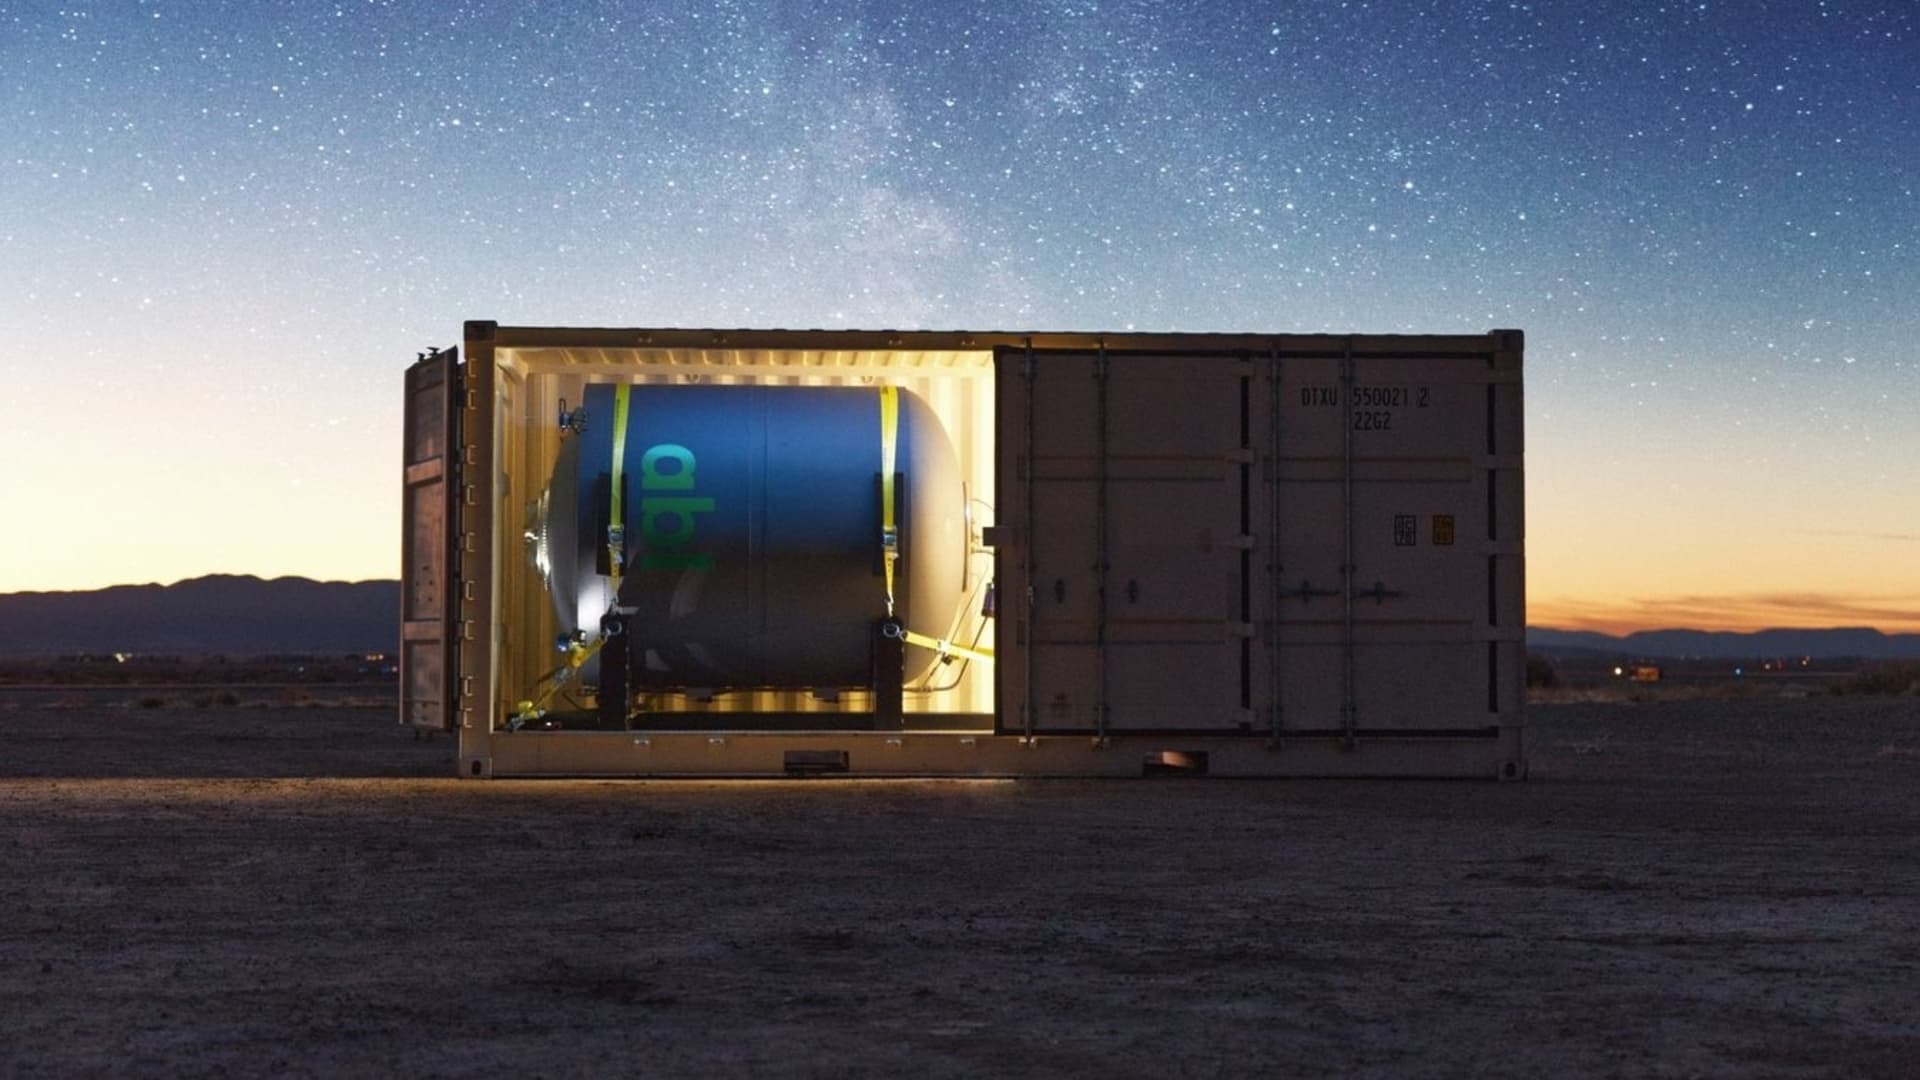 One of the shipping containers that holds the GS0 deployable launch system infrastructure.